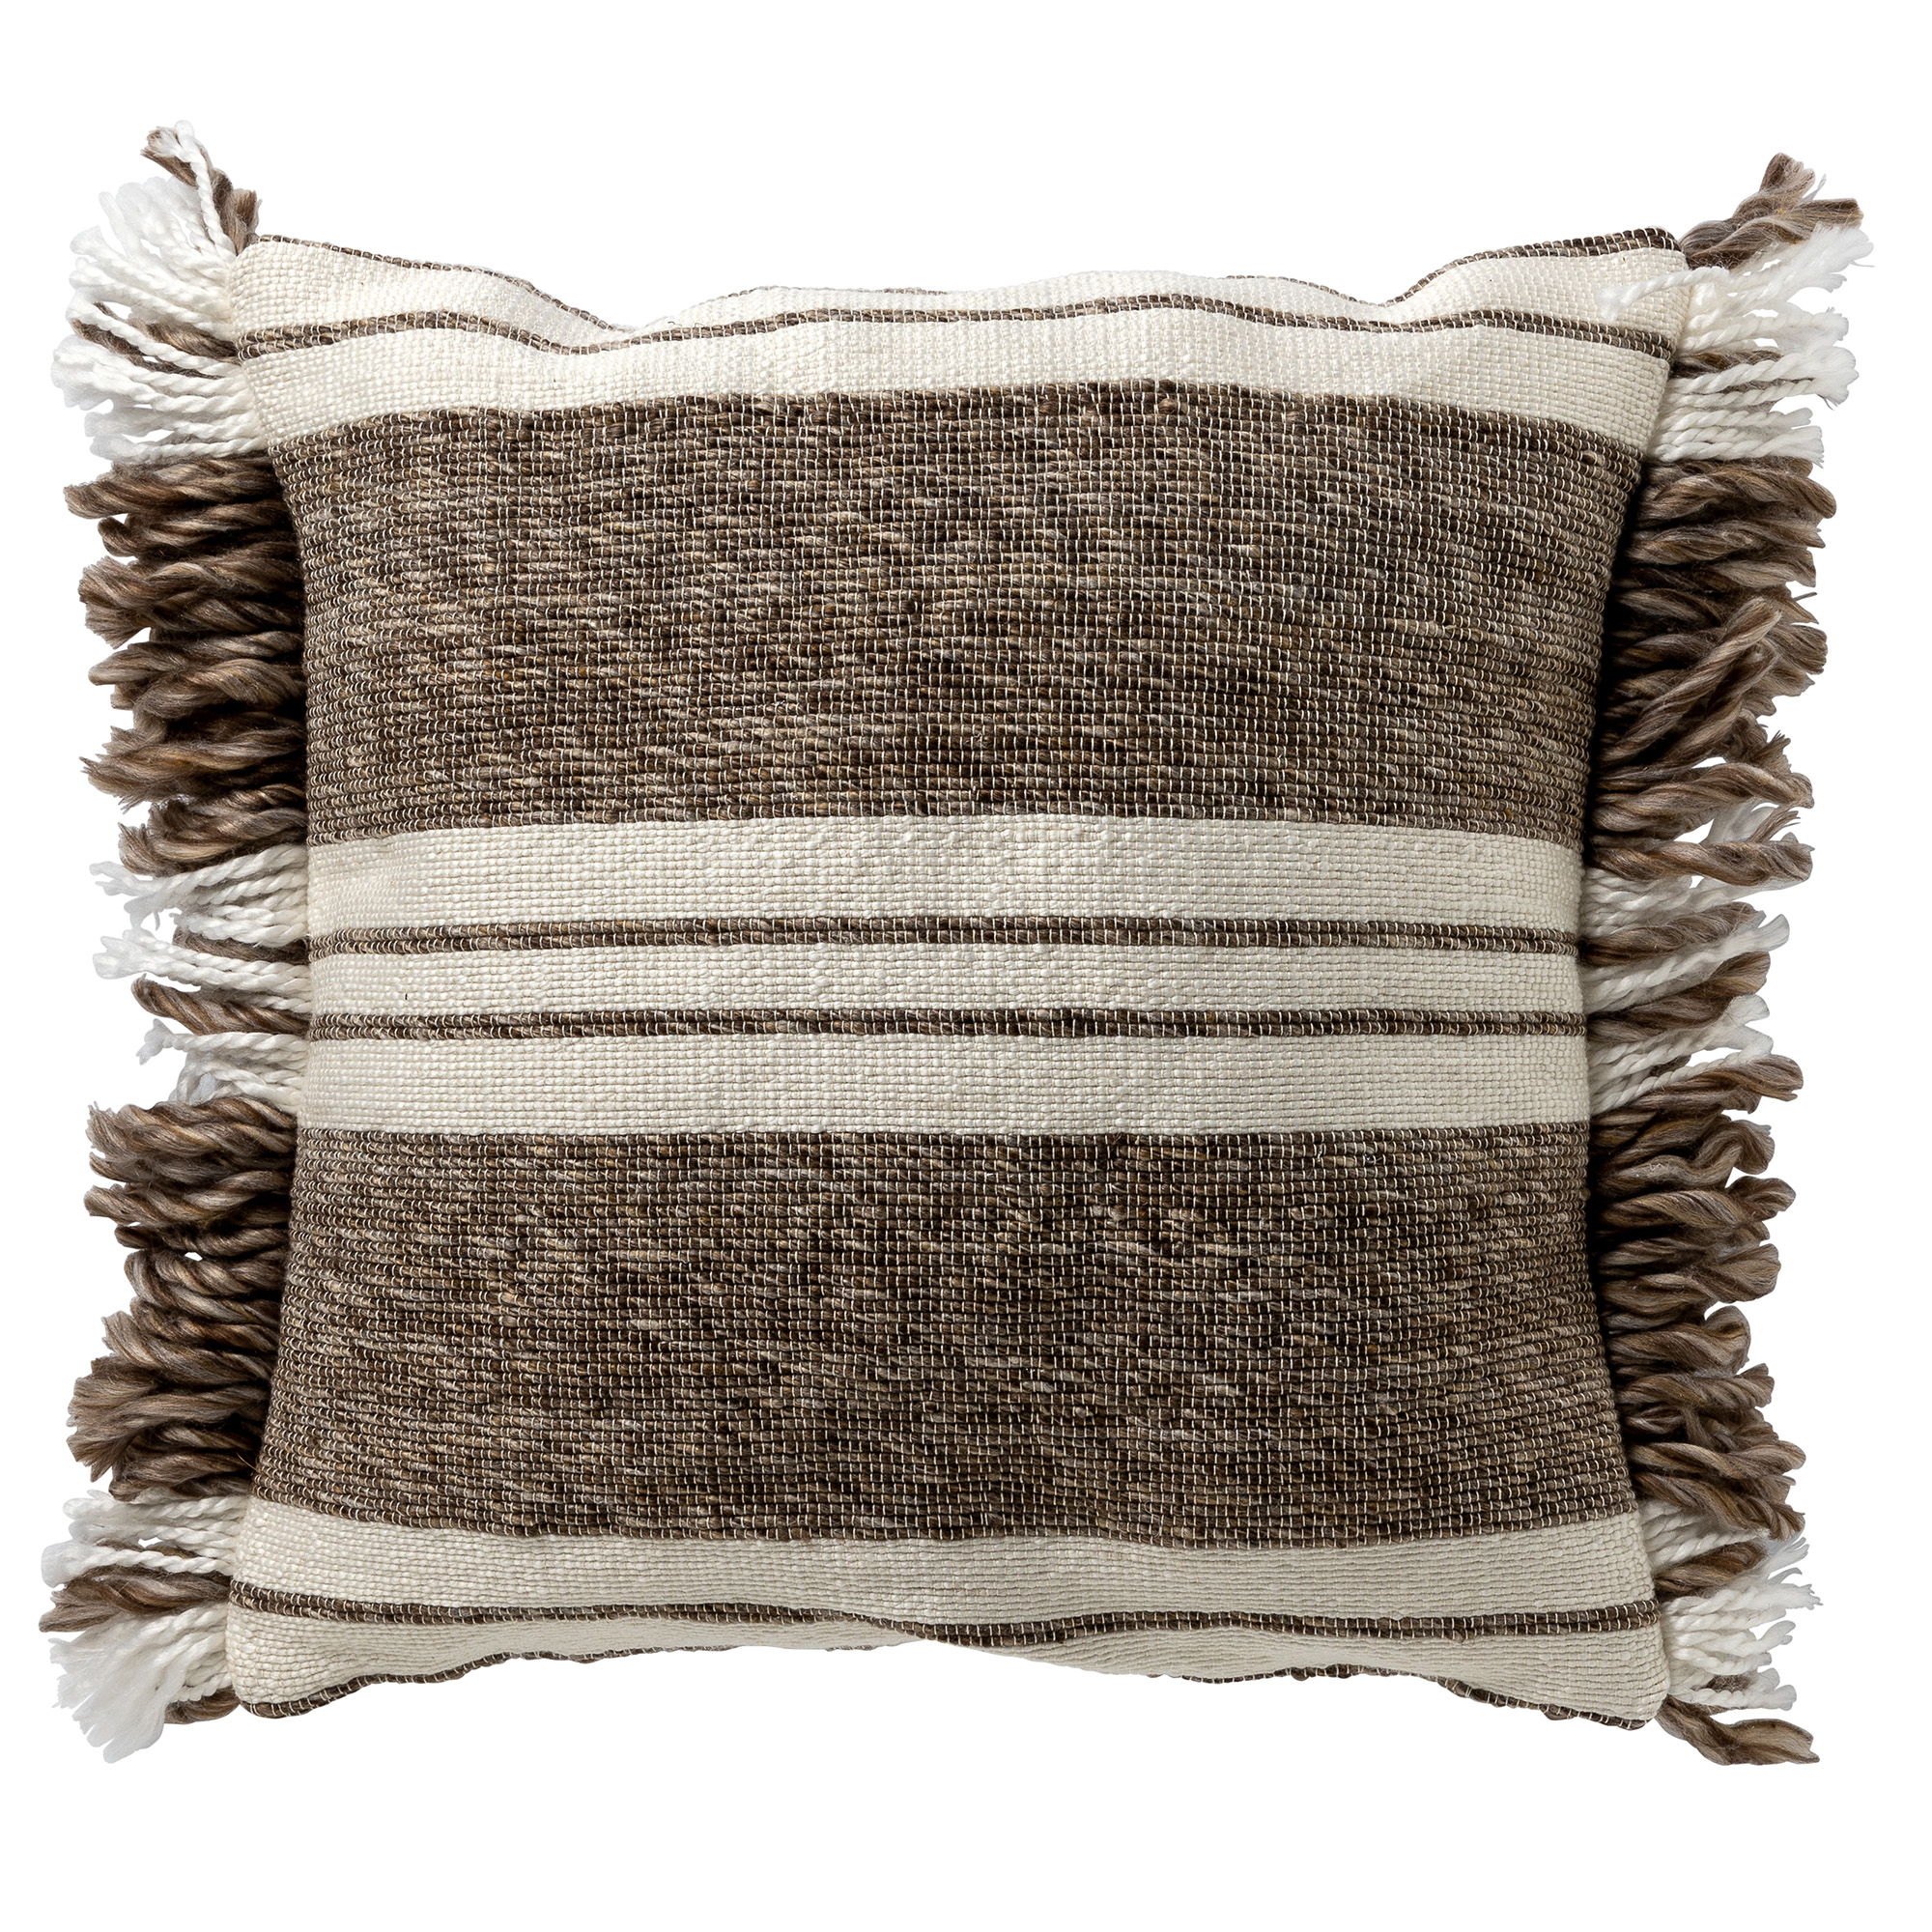 EDGAR - Cushion cover made of 85% recycled polyester - Eco Line collection 45x45 cm - Driftwood - taupe